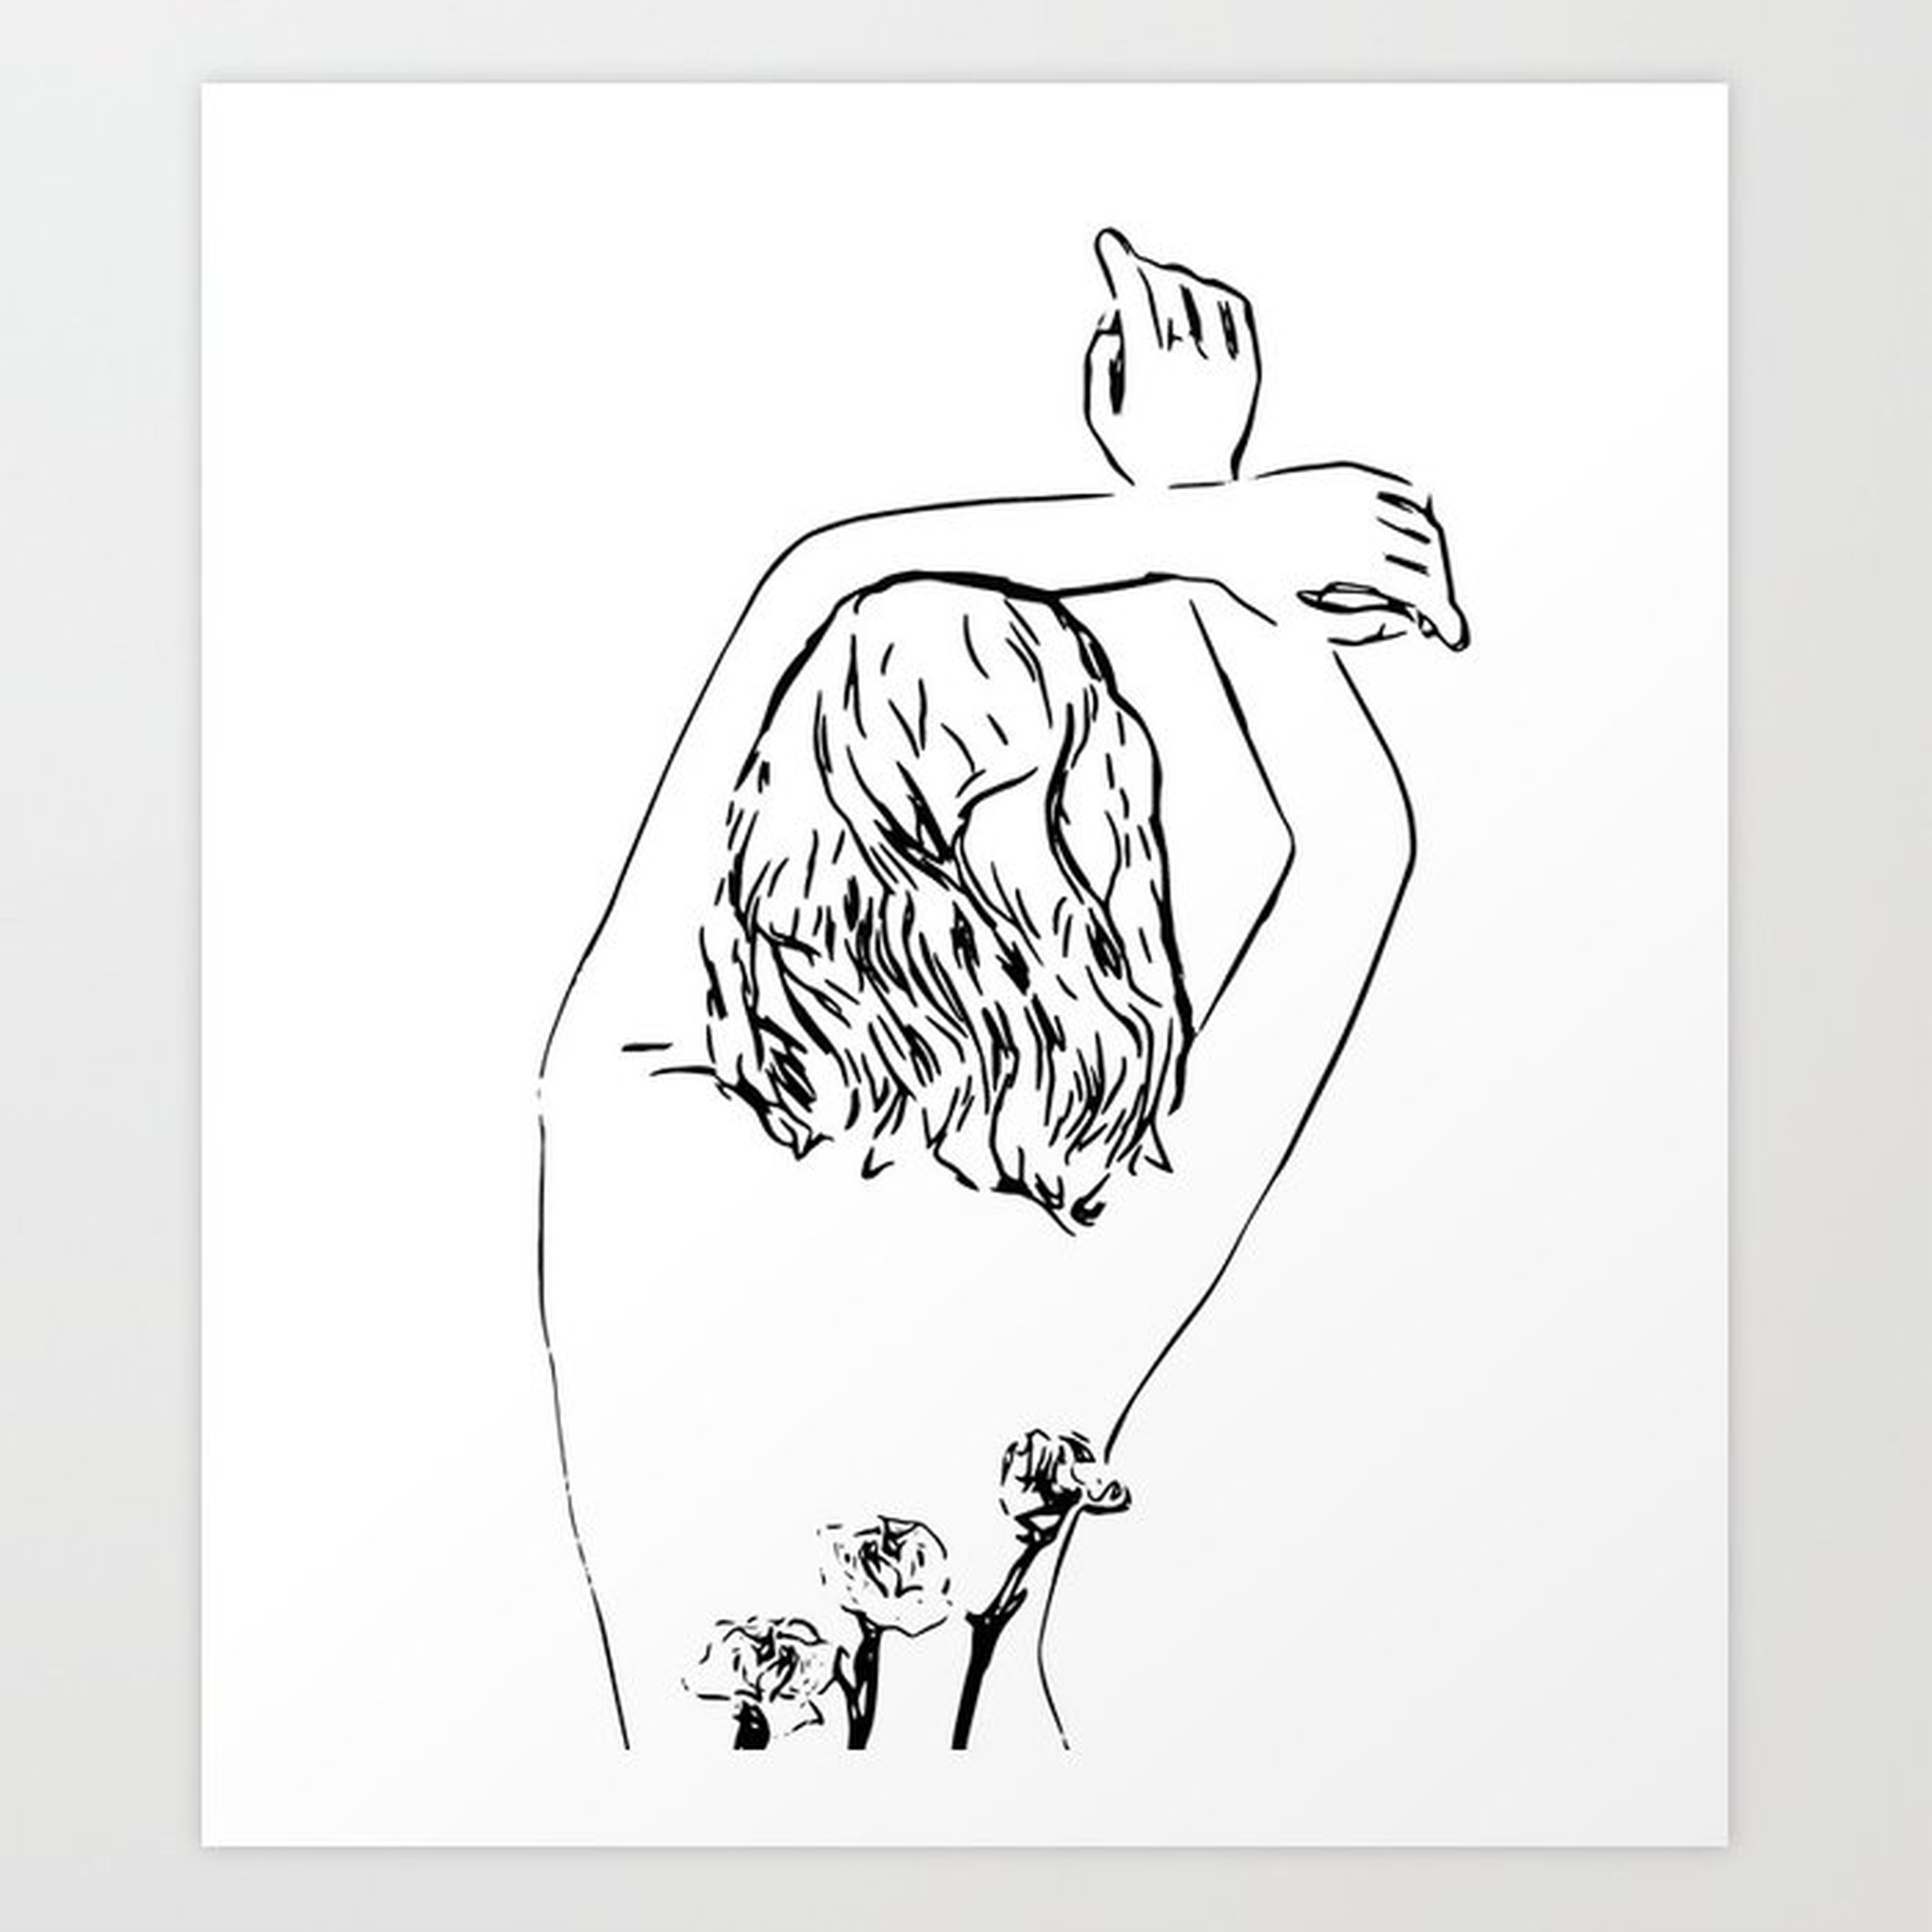 Oblivious #drawing #illustration Art Print by 83 Oranges Free Spirits - X-Large - Society6